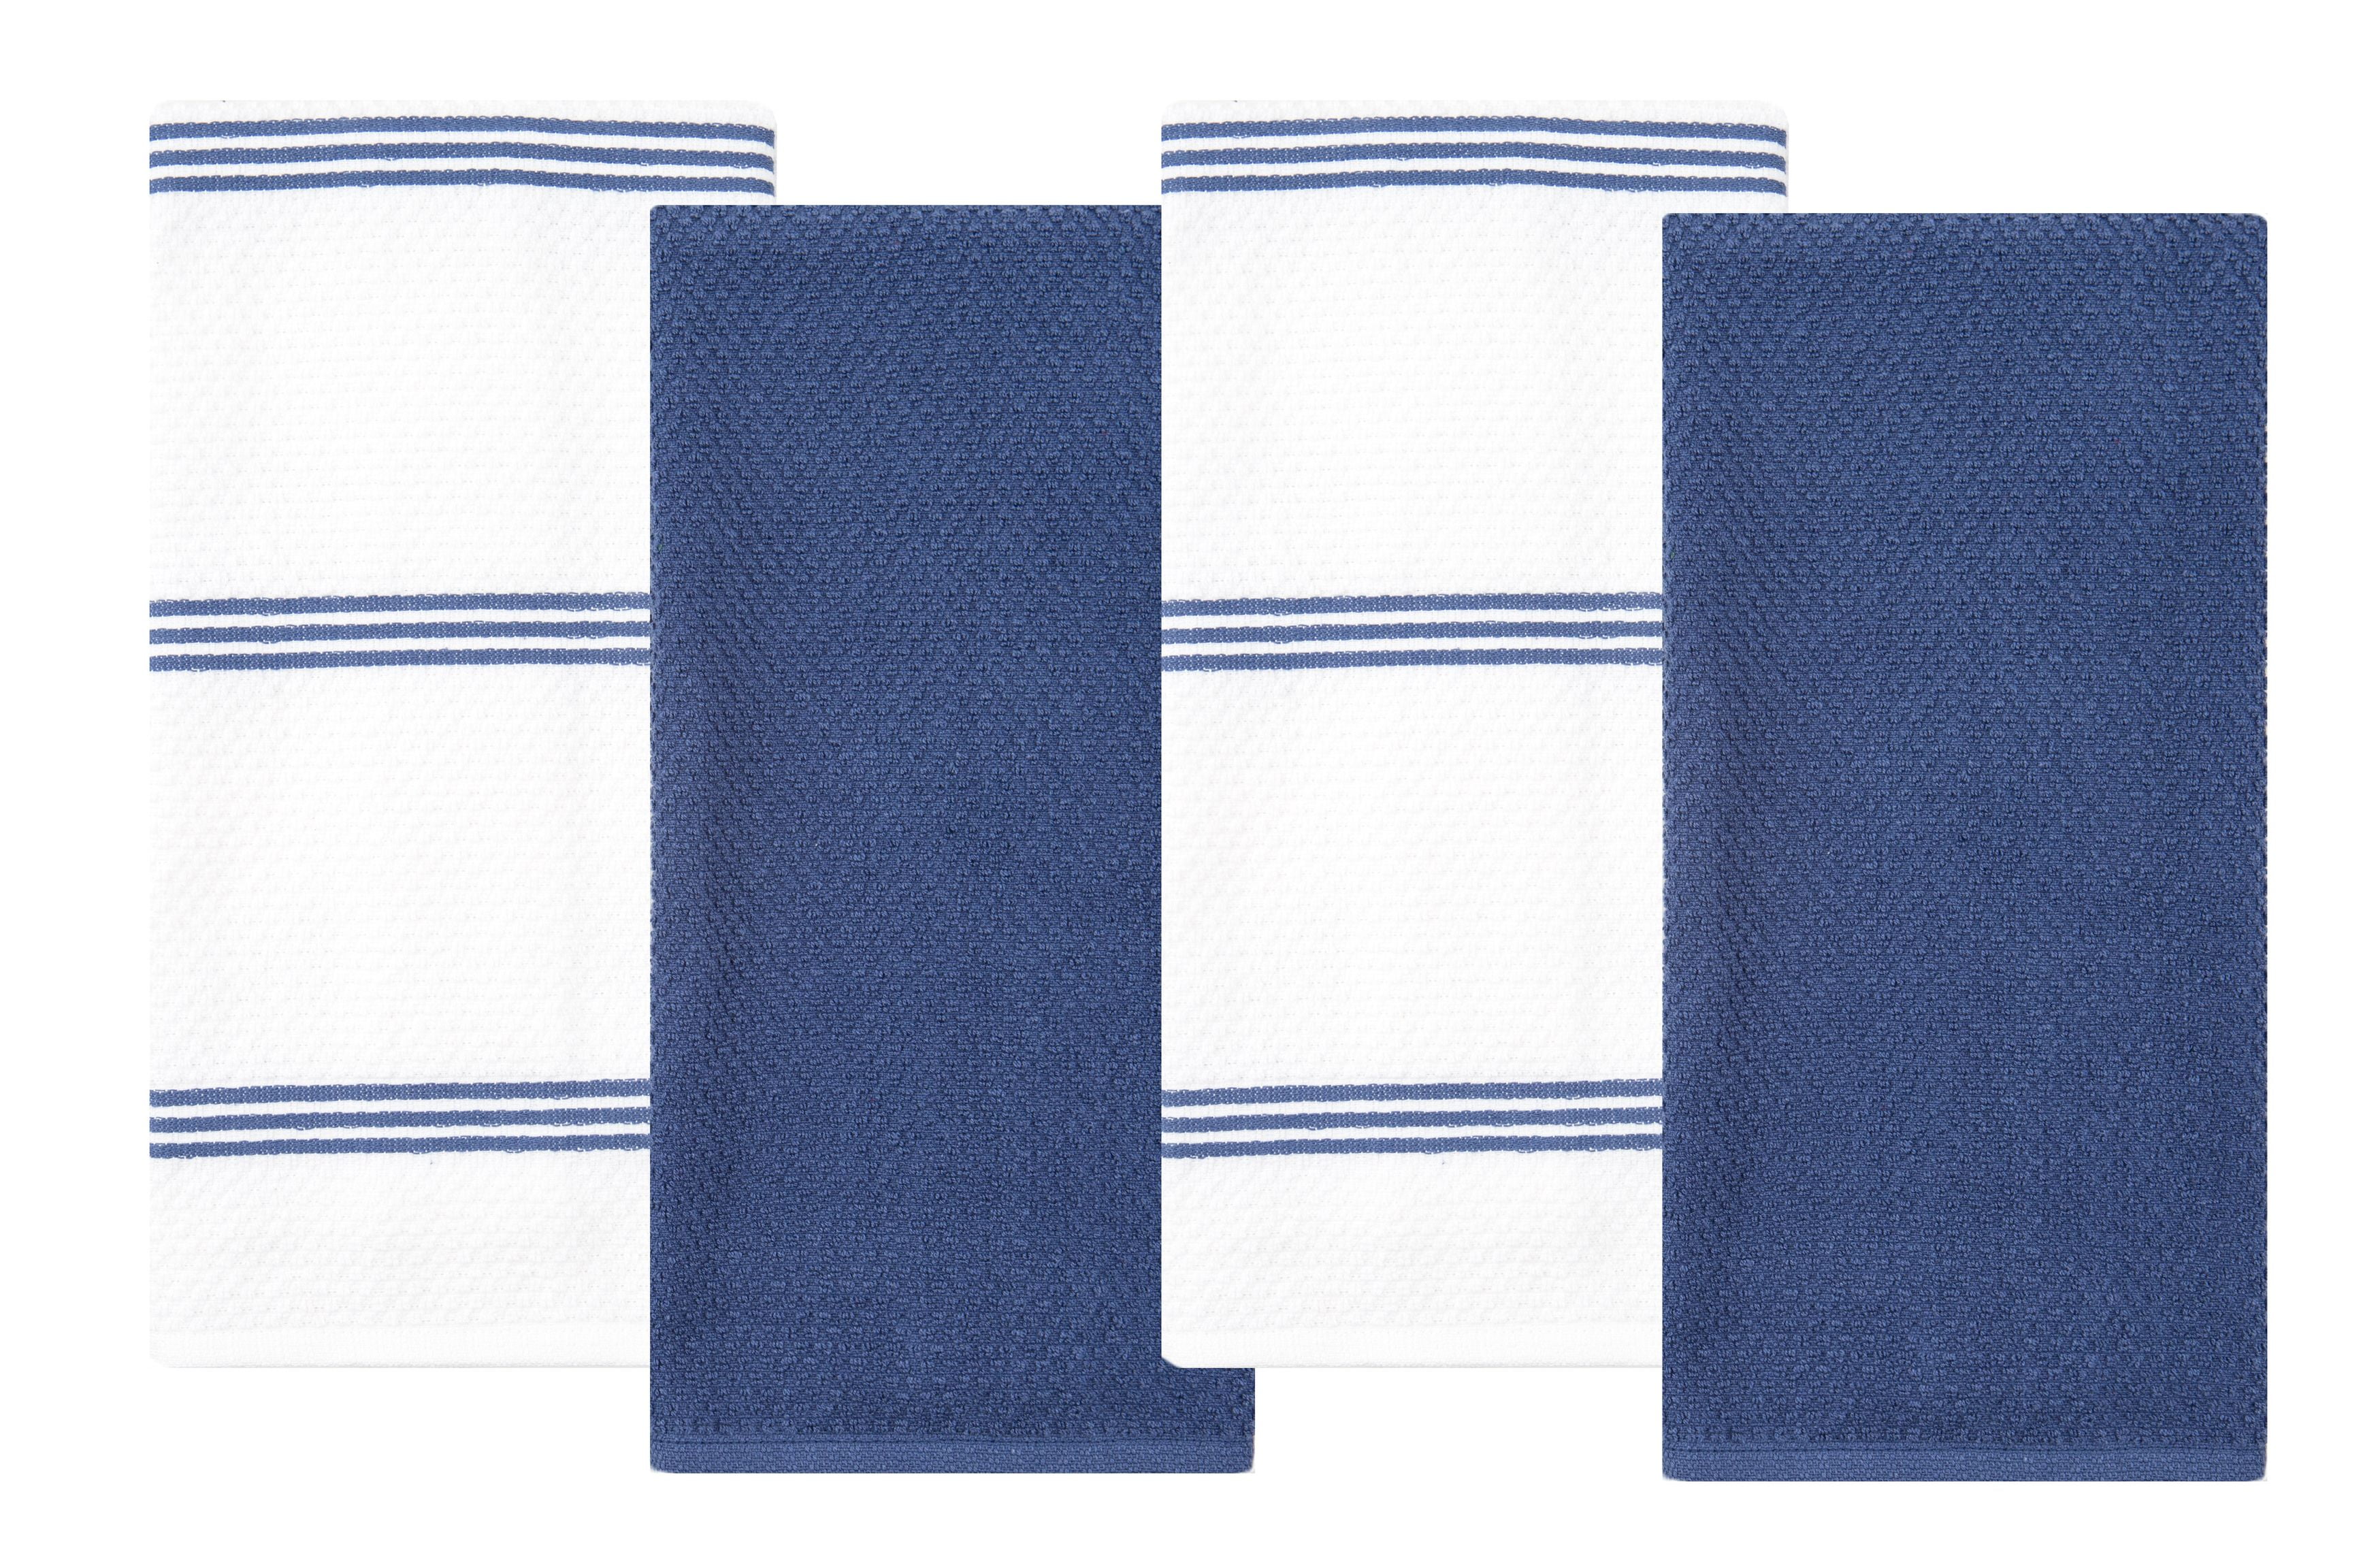 Sticky Toffee Kitchen Towels Dish Towels 100% Cotton, Set of 4, Dark Blue  and White Hand Towels, Tea Towels, Reusable Absorbent Cleaning Cloths, 28  in x 16 in 